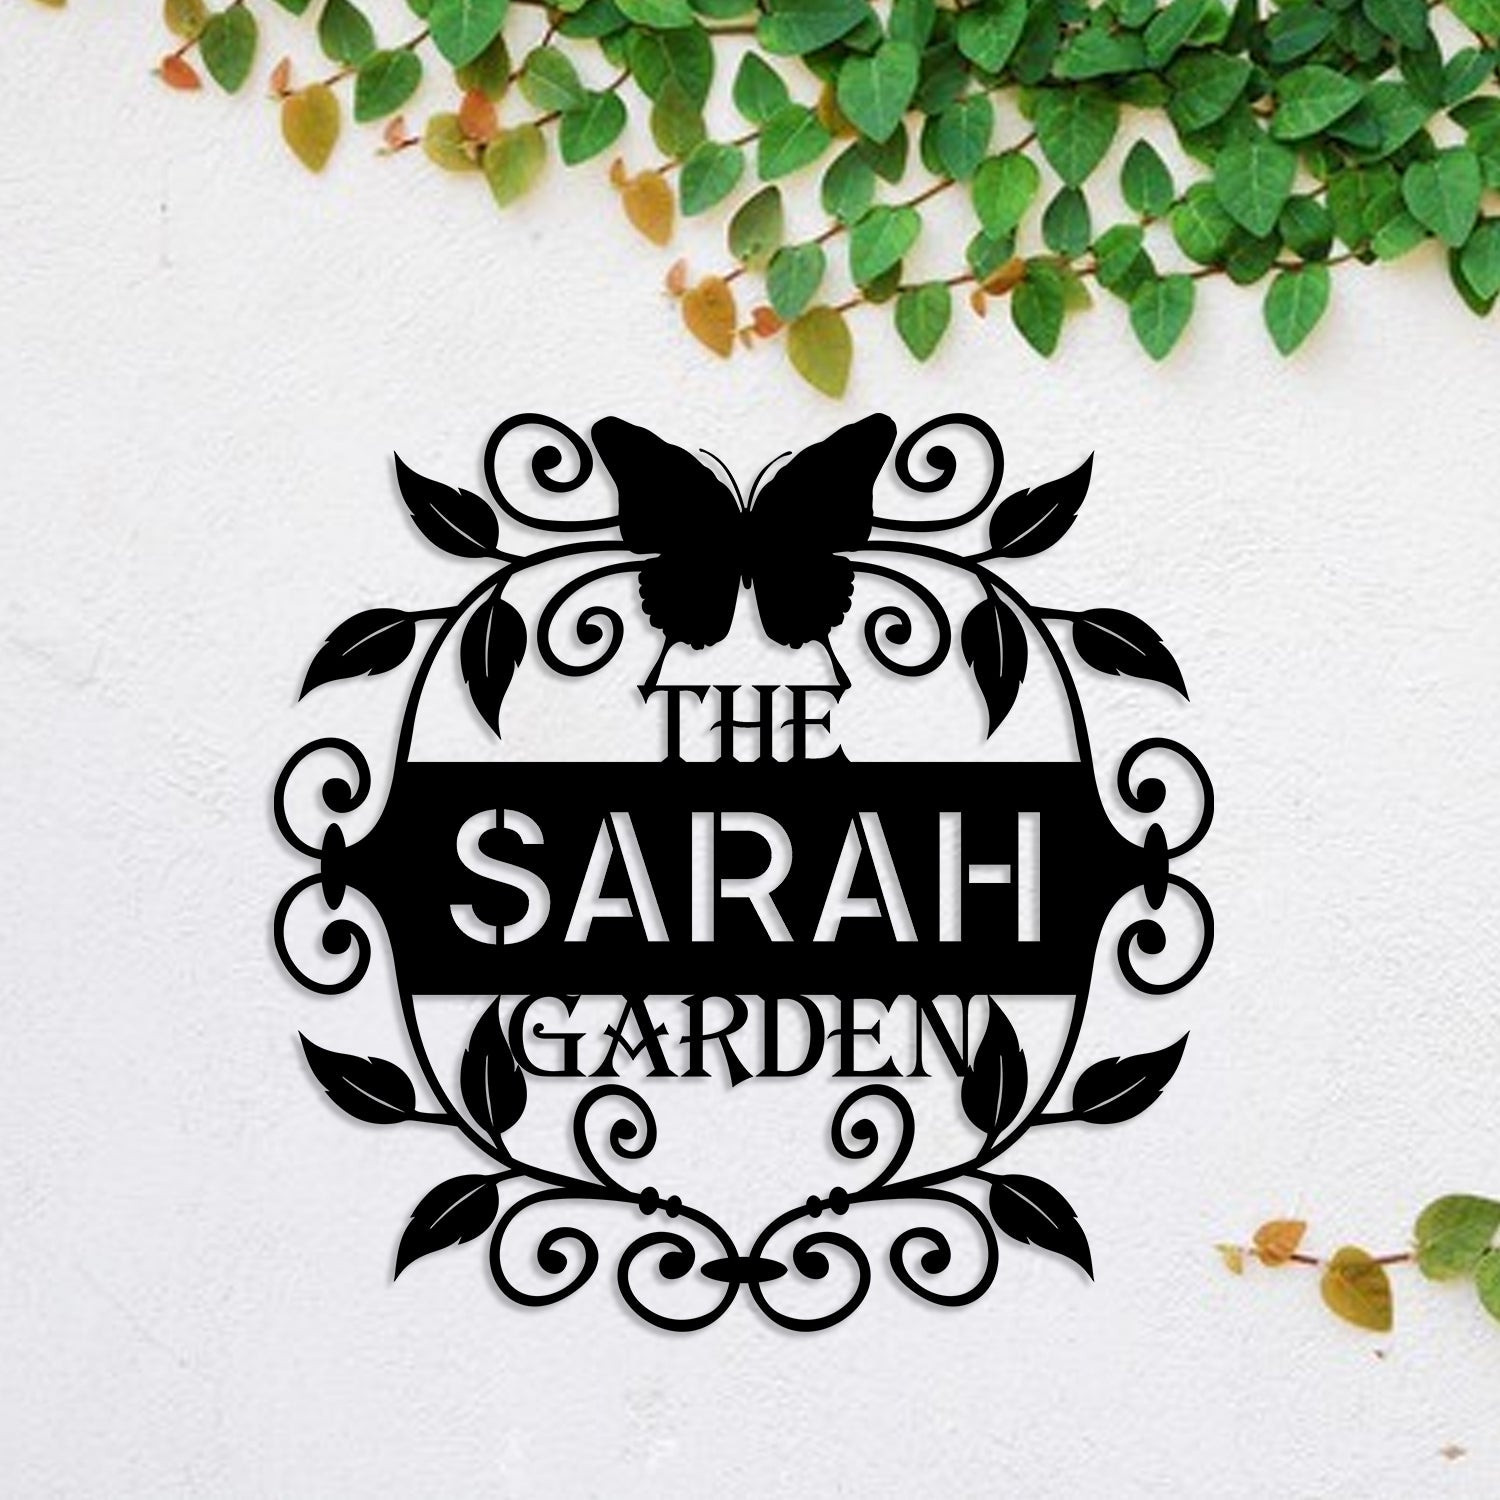 Personalized Metal Garden Sign, Home Decor, Wedding Gift For Her, Gardening Lovers, Metal Laser Cut Metal Signs Custom Gift Ideas 18x18IN